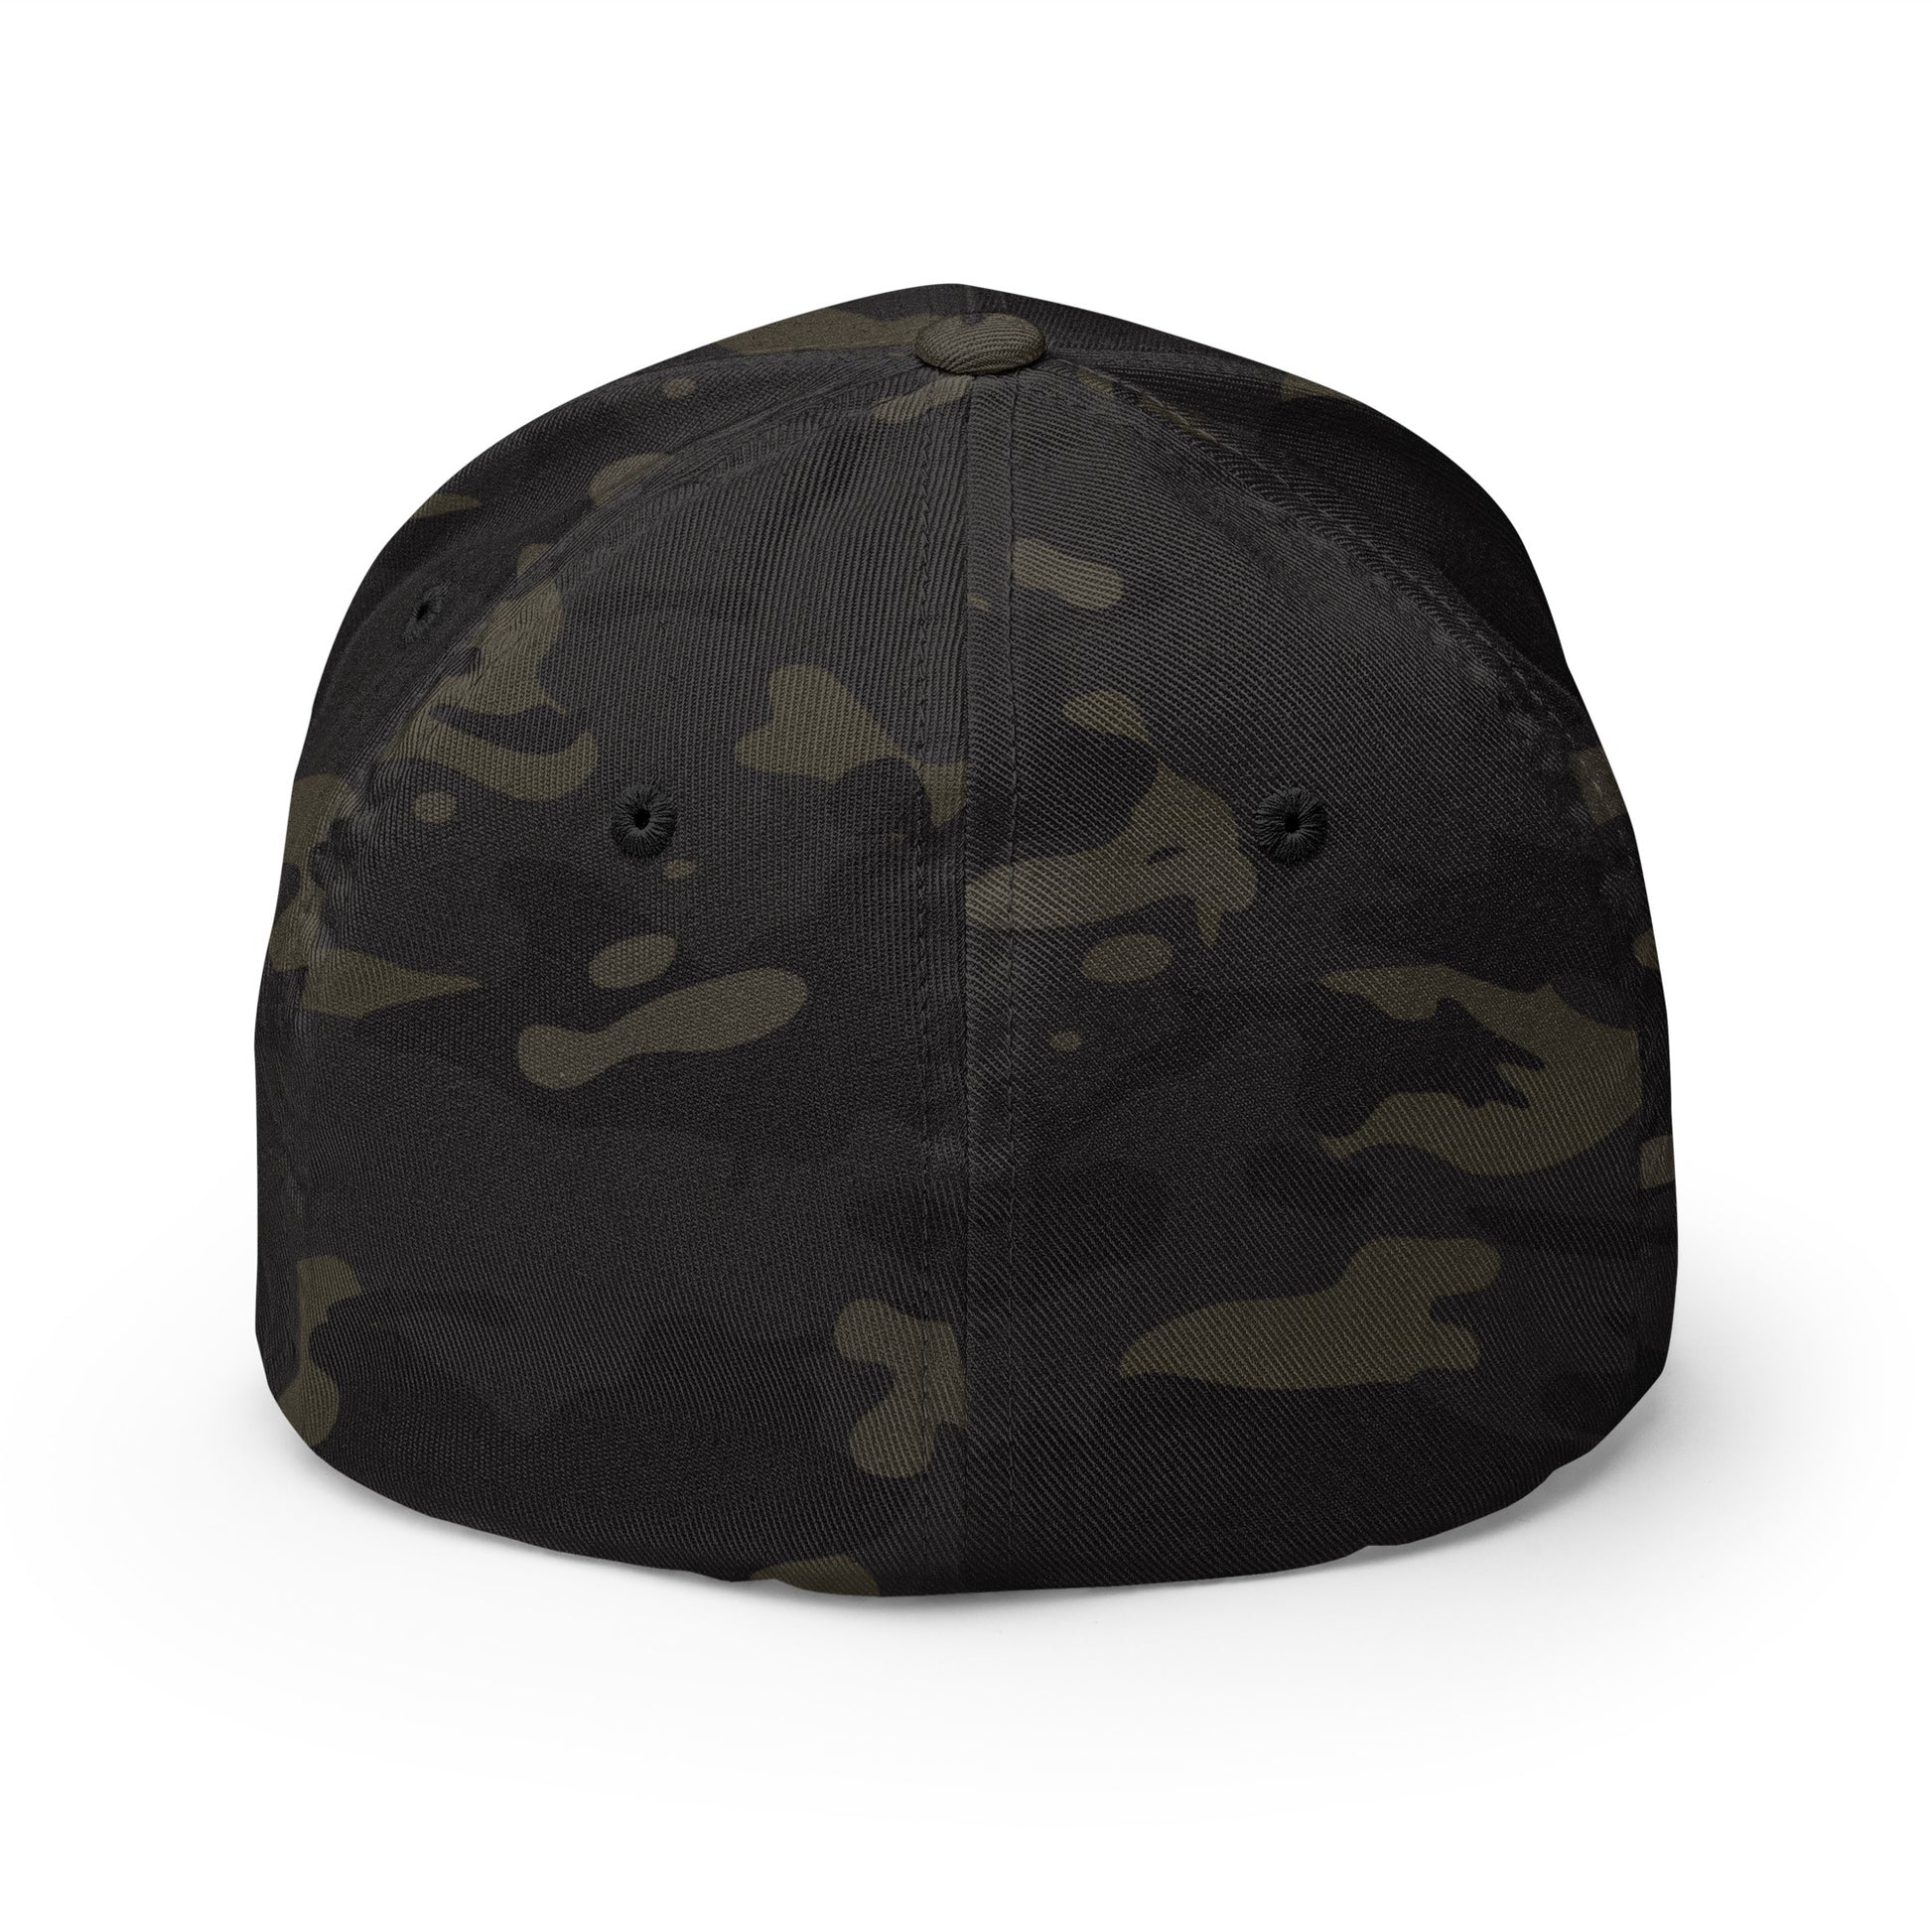 Rakkgear Embroidered Multicam Black Fitted Baseball Cap: Stylish cap with Iconic Rakkgear Logo embroidery on the front.